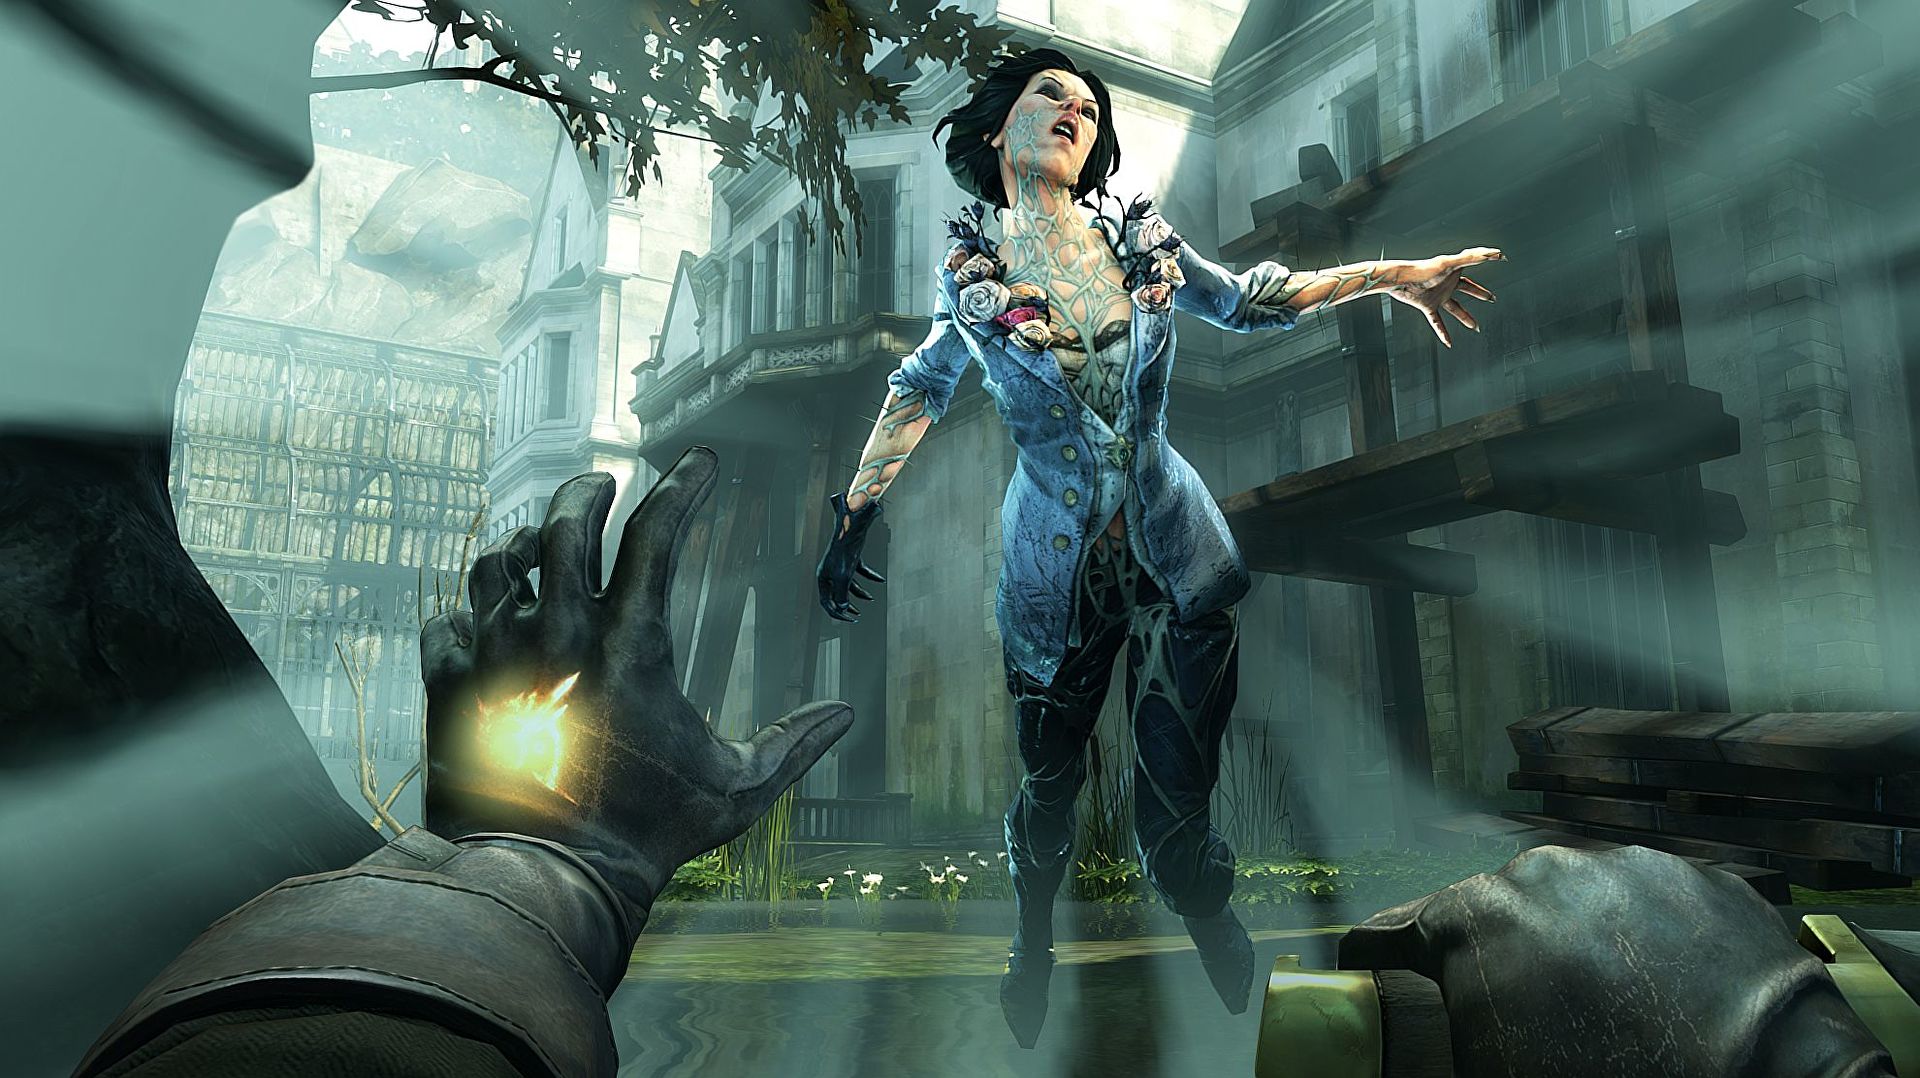 Here's a batch of lovely Dishonored: Definitive Edition image